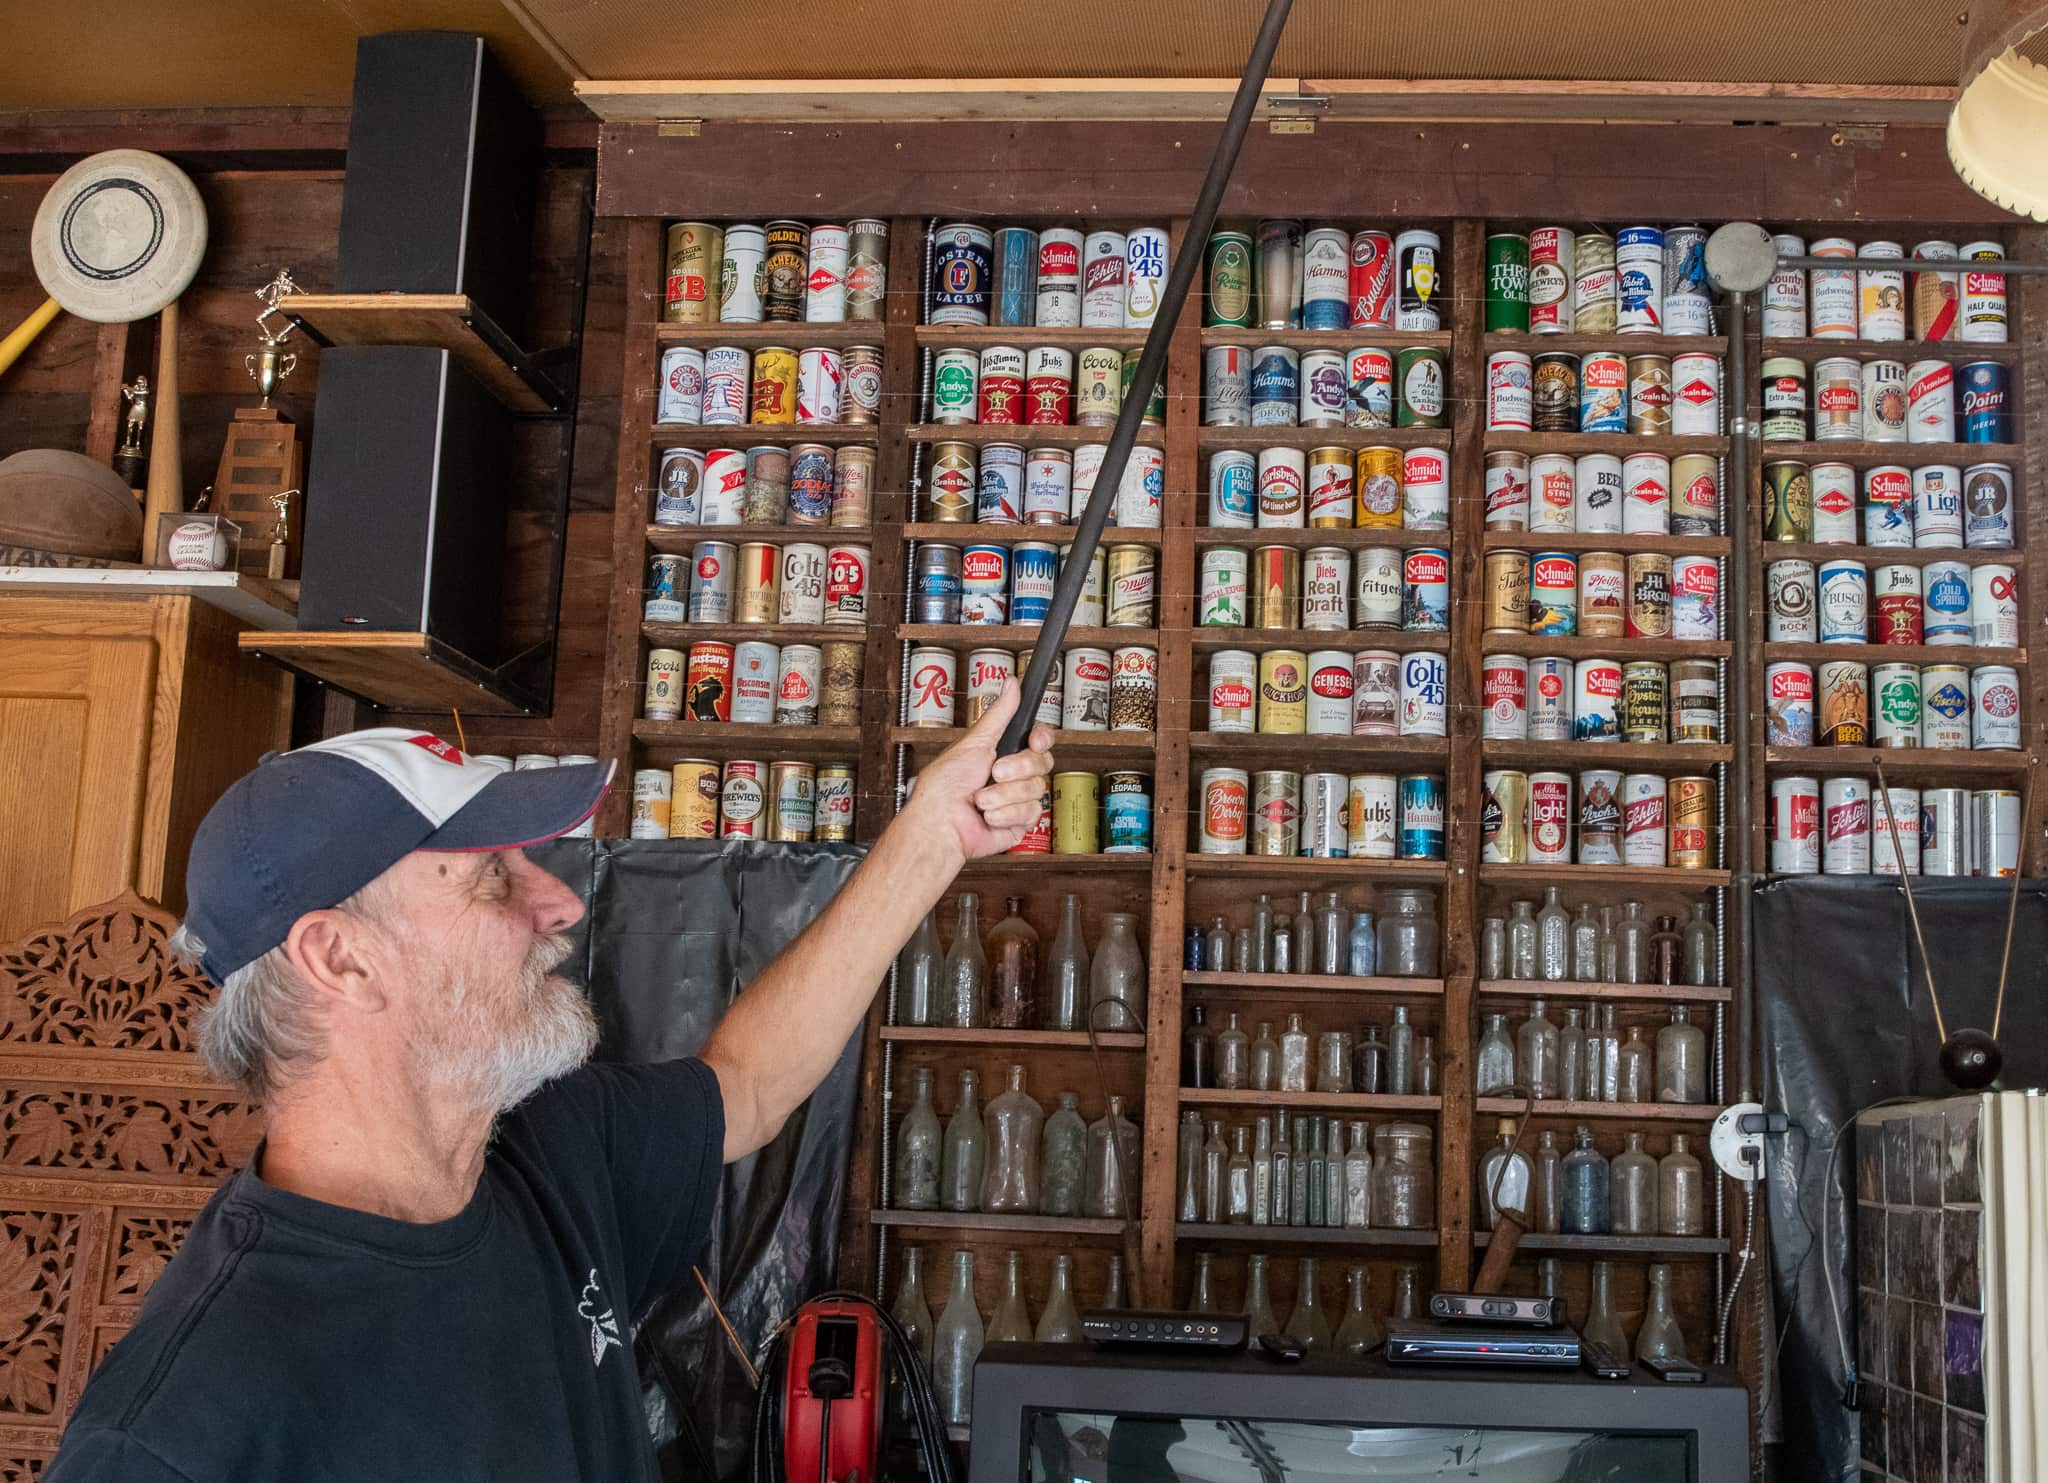 The beer cans, hidden behind Hamm’s Beer displays, entered Vic’s collection when he worked for a Mankato beer distributor.